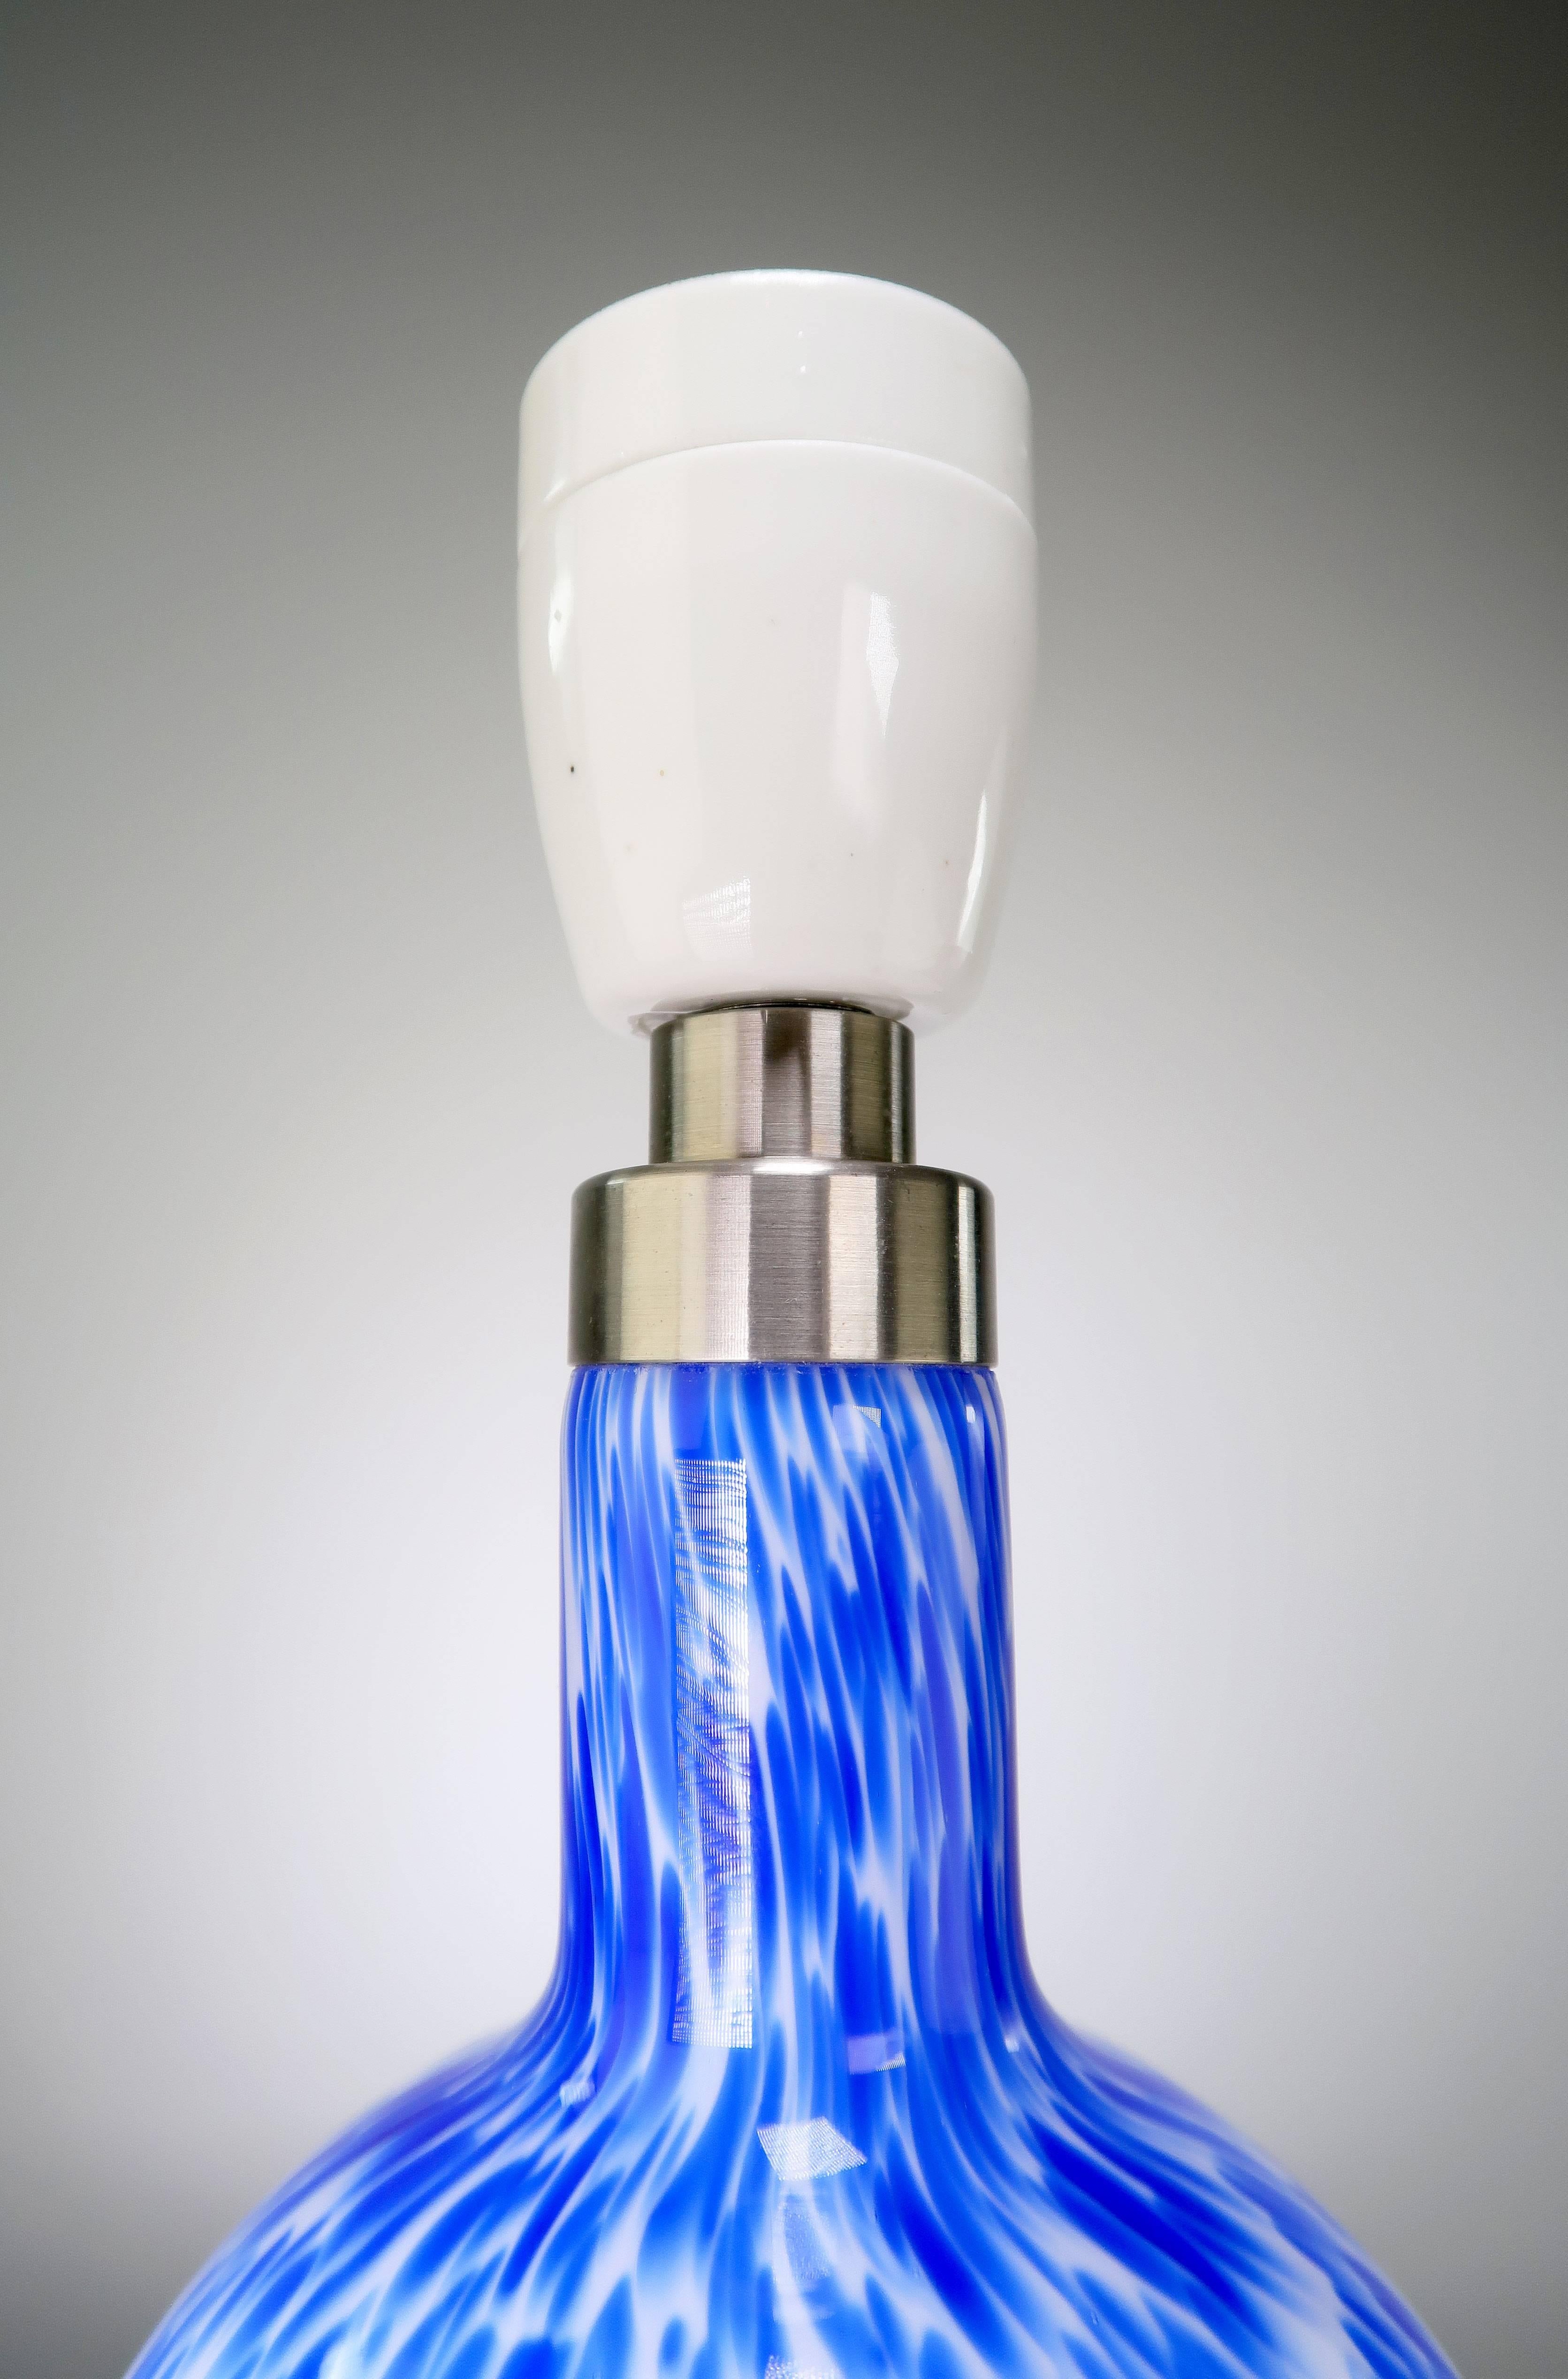 Stunning Danish Mid Century Modern hand blown opaline white glass table lamp with electric blue colorings on the top of the lamp. From the Torino series designed by Michael Bang for Holmegaard, marketed by Royal Copenhagen. Porcelain fitting